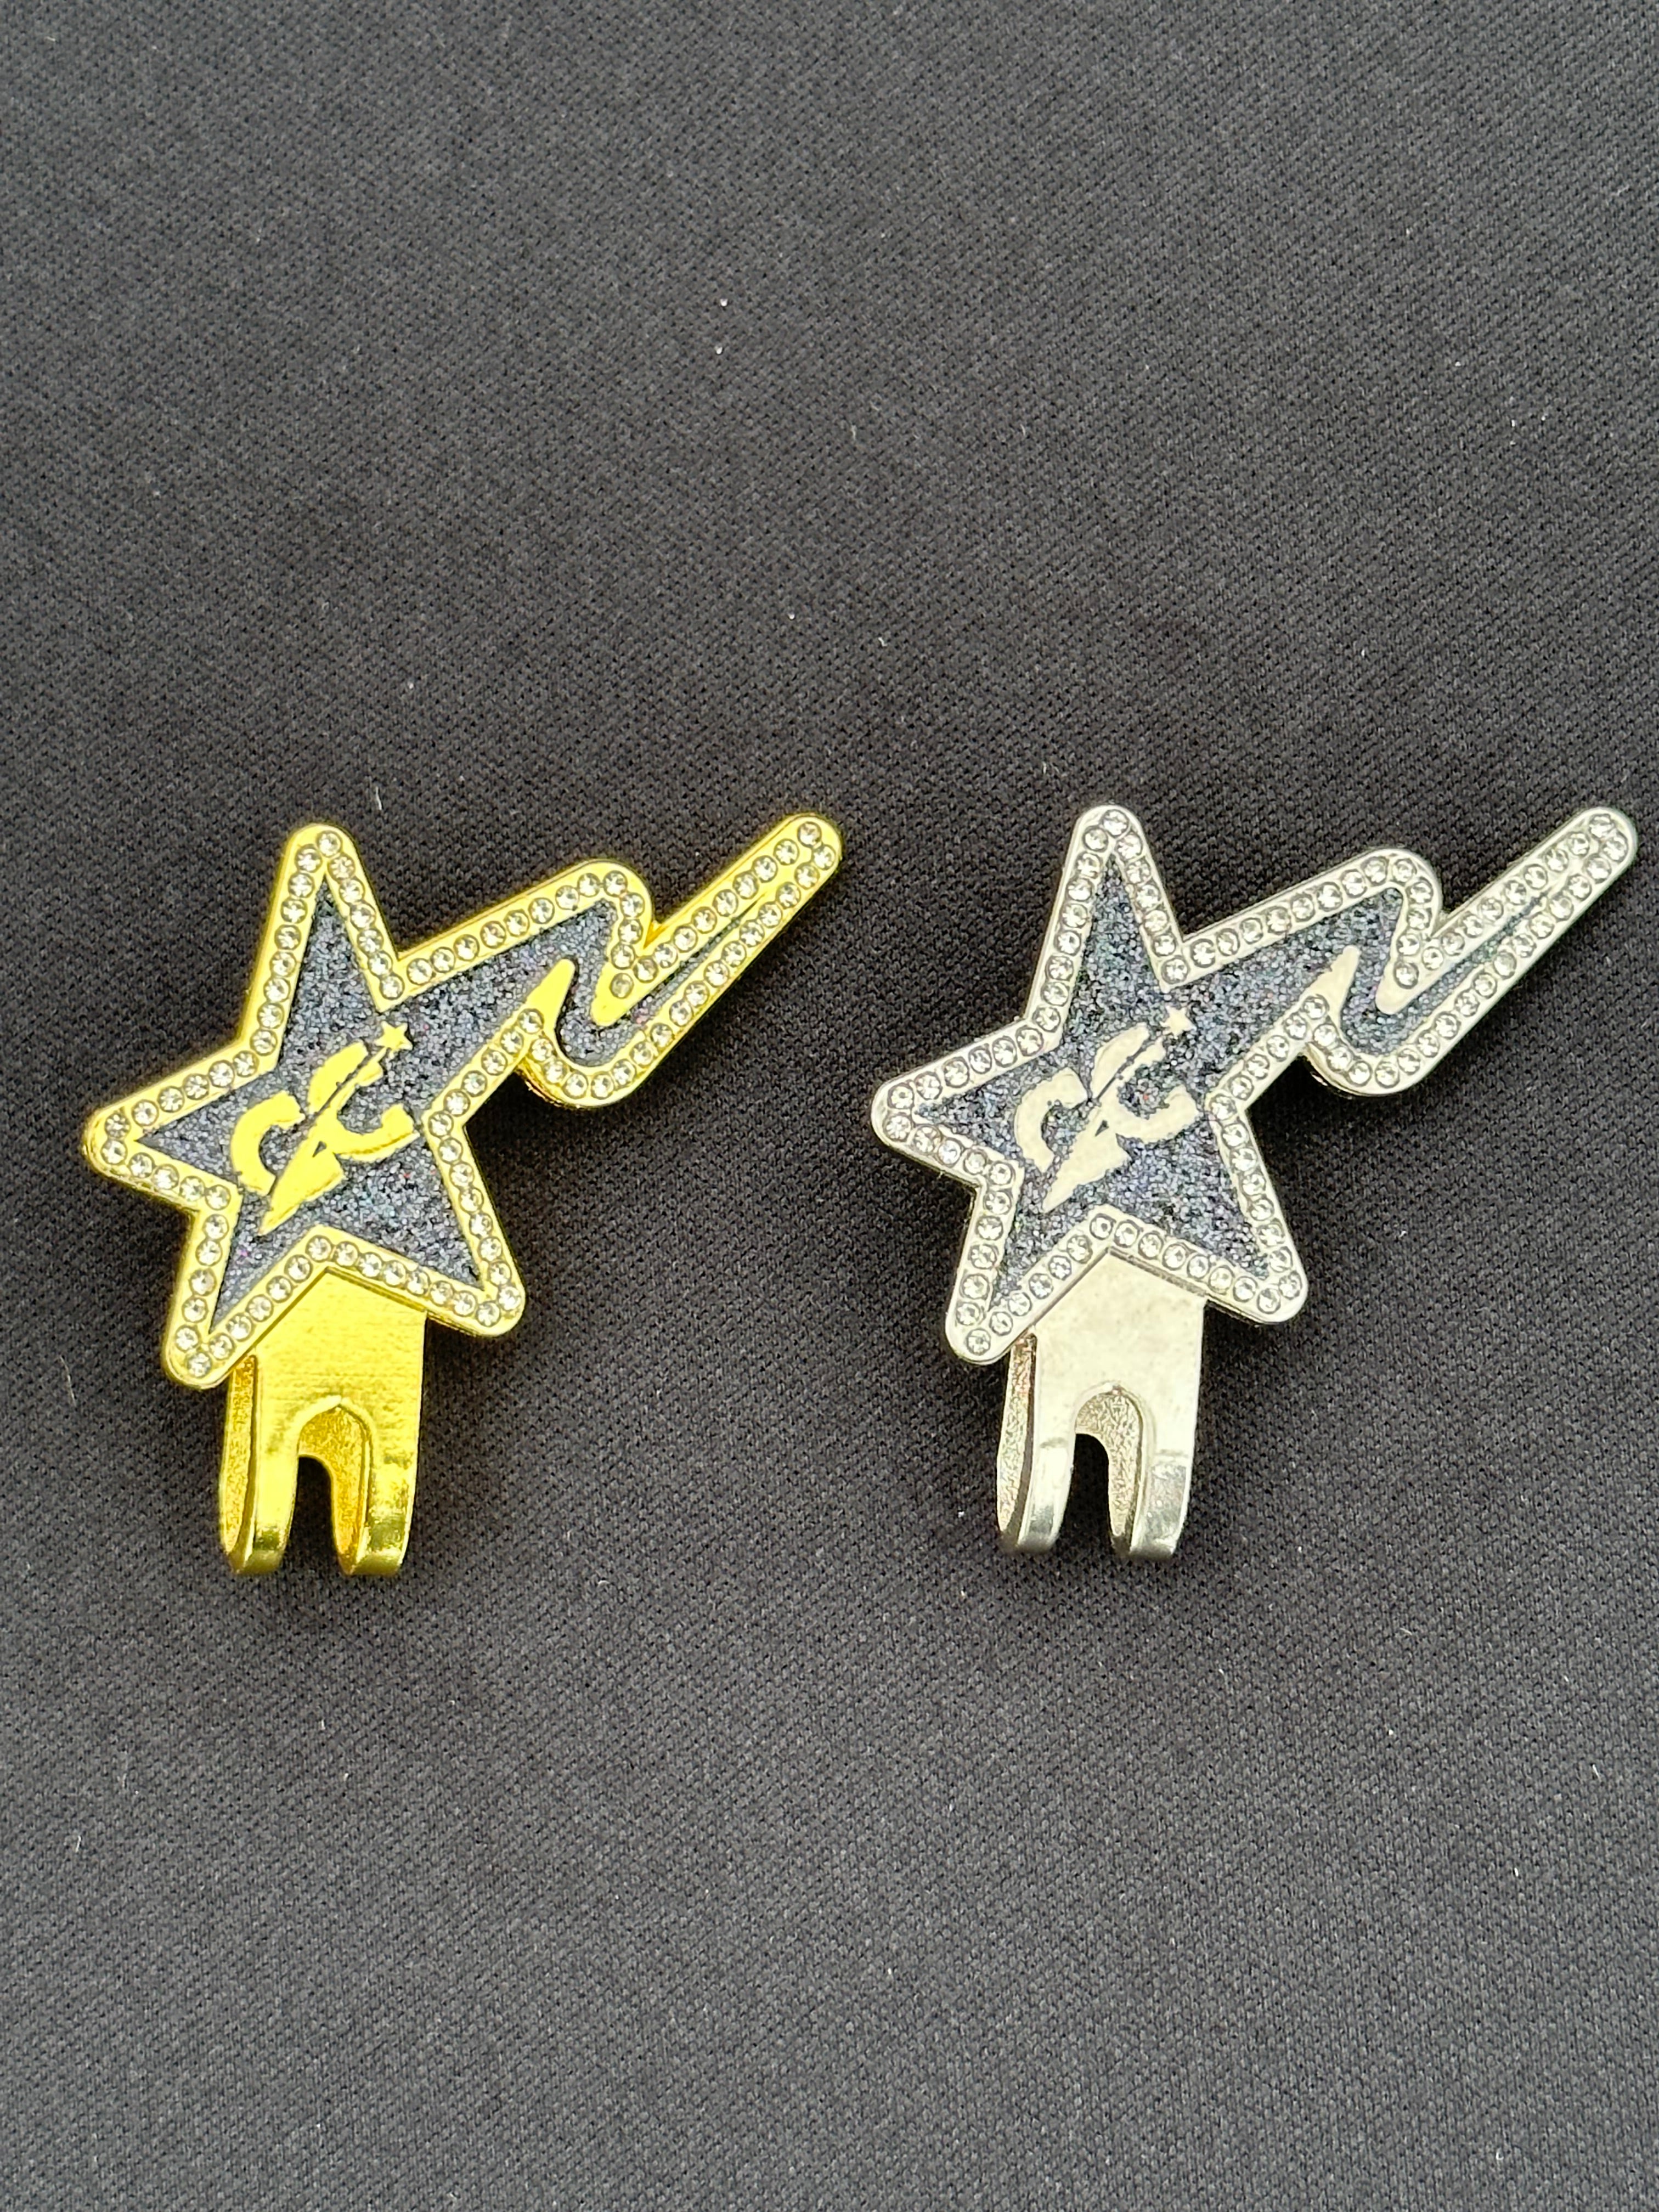 2PACK STAR ICED OUT CAP CITY BLIPS (GOLD & SILVER) W/ RHINESTONES